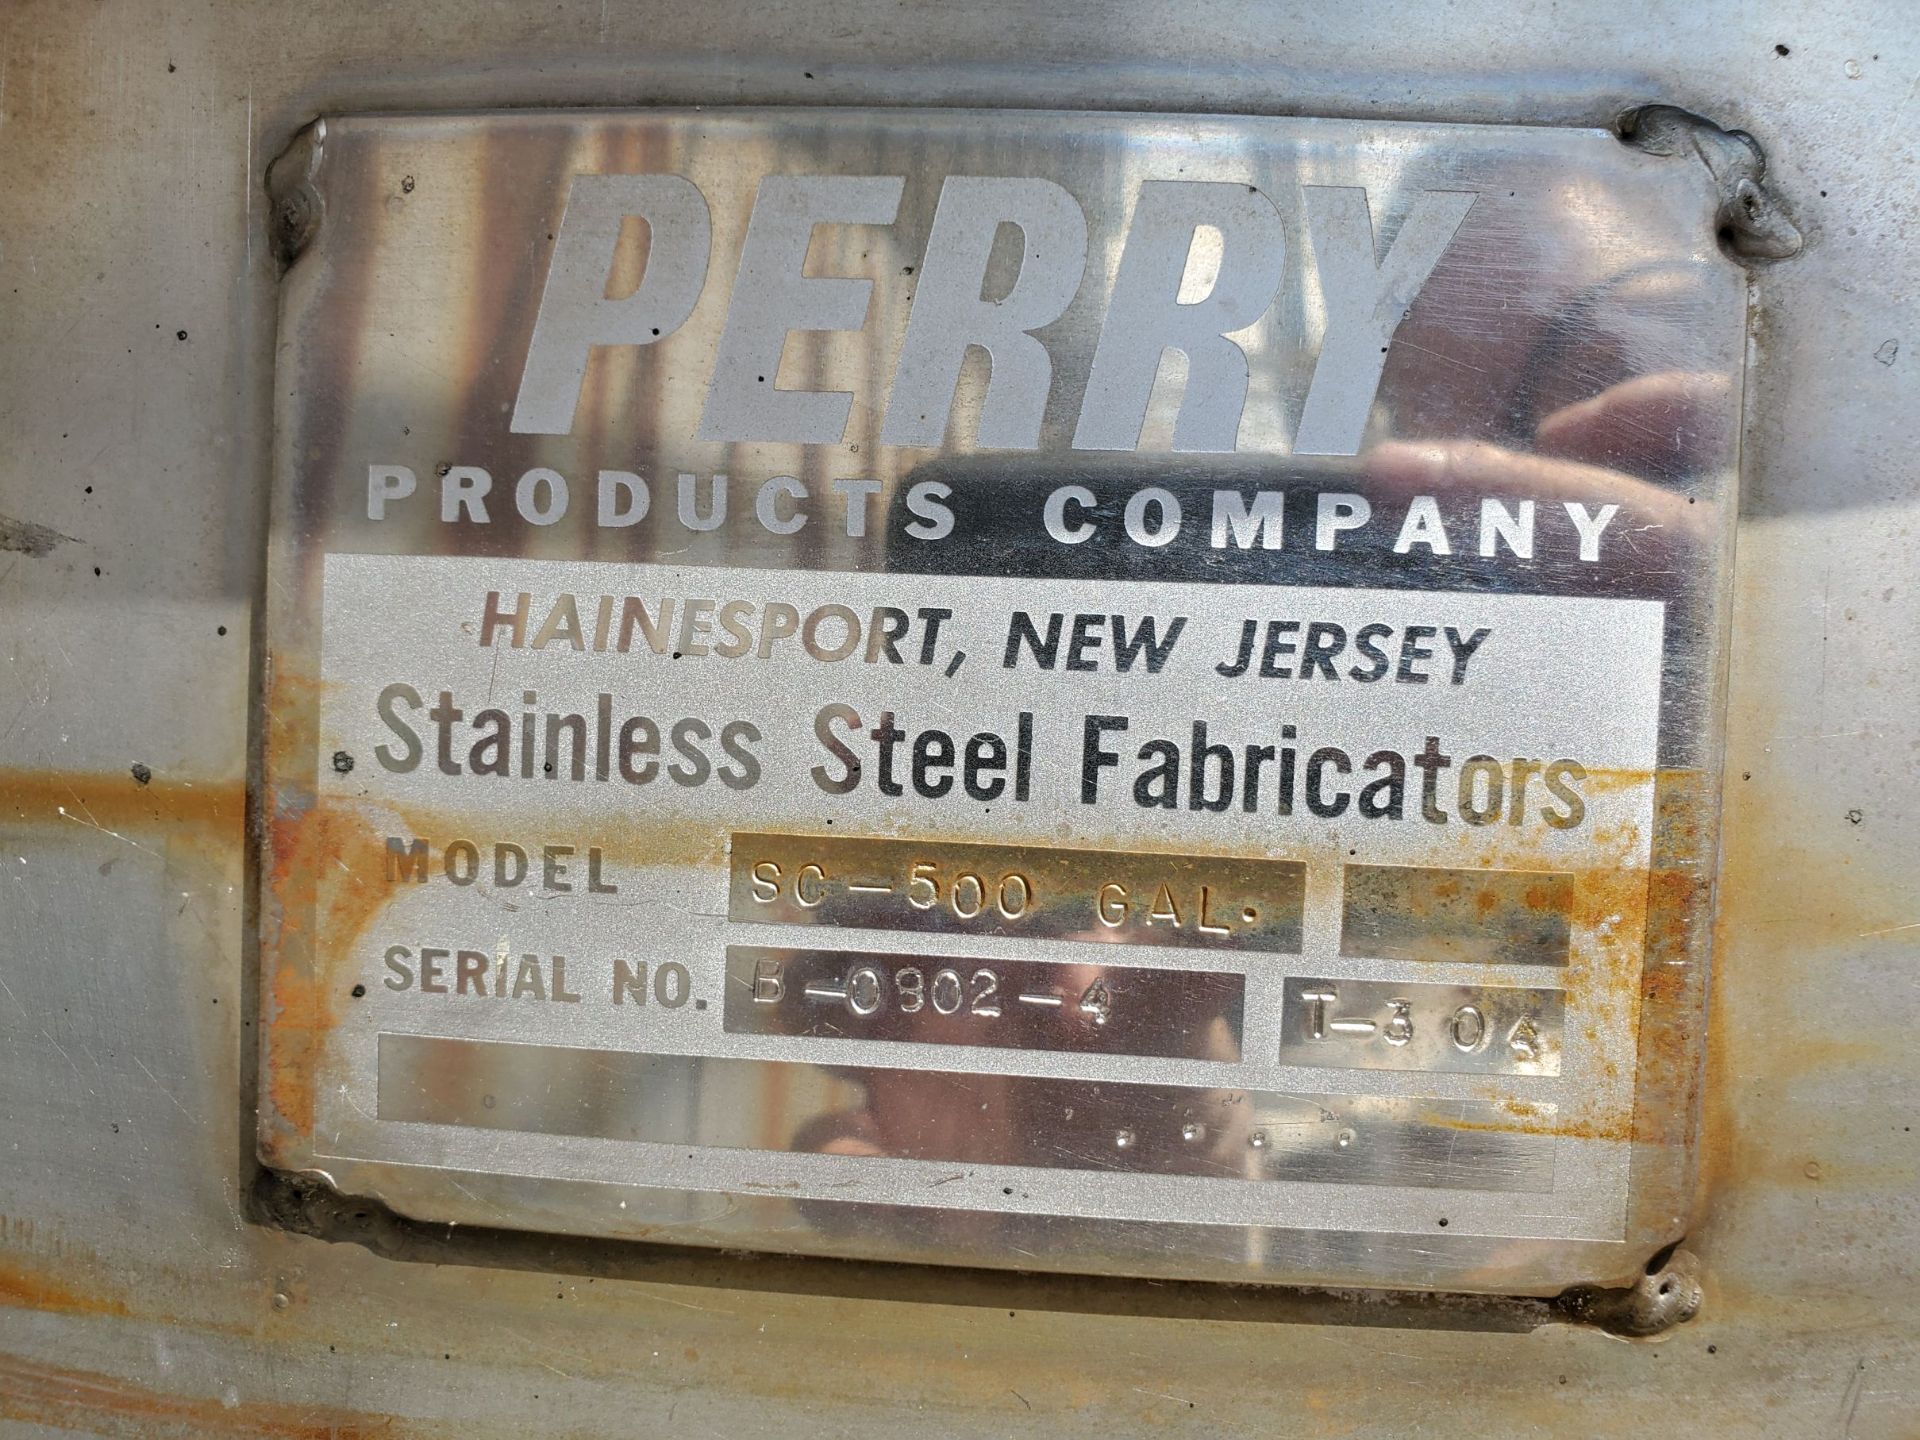 Perry Products Stainless Steel Tank, approx 500 gallon, 304 Stainless steel, SN B-0802-4, Model SC- - Image 2 of 3